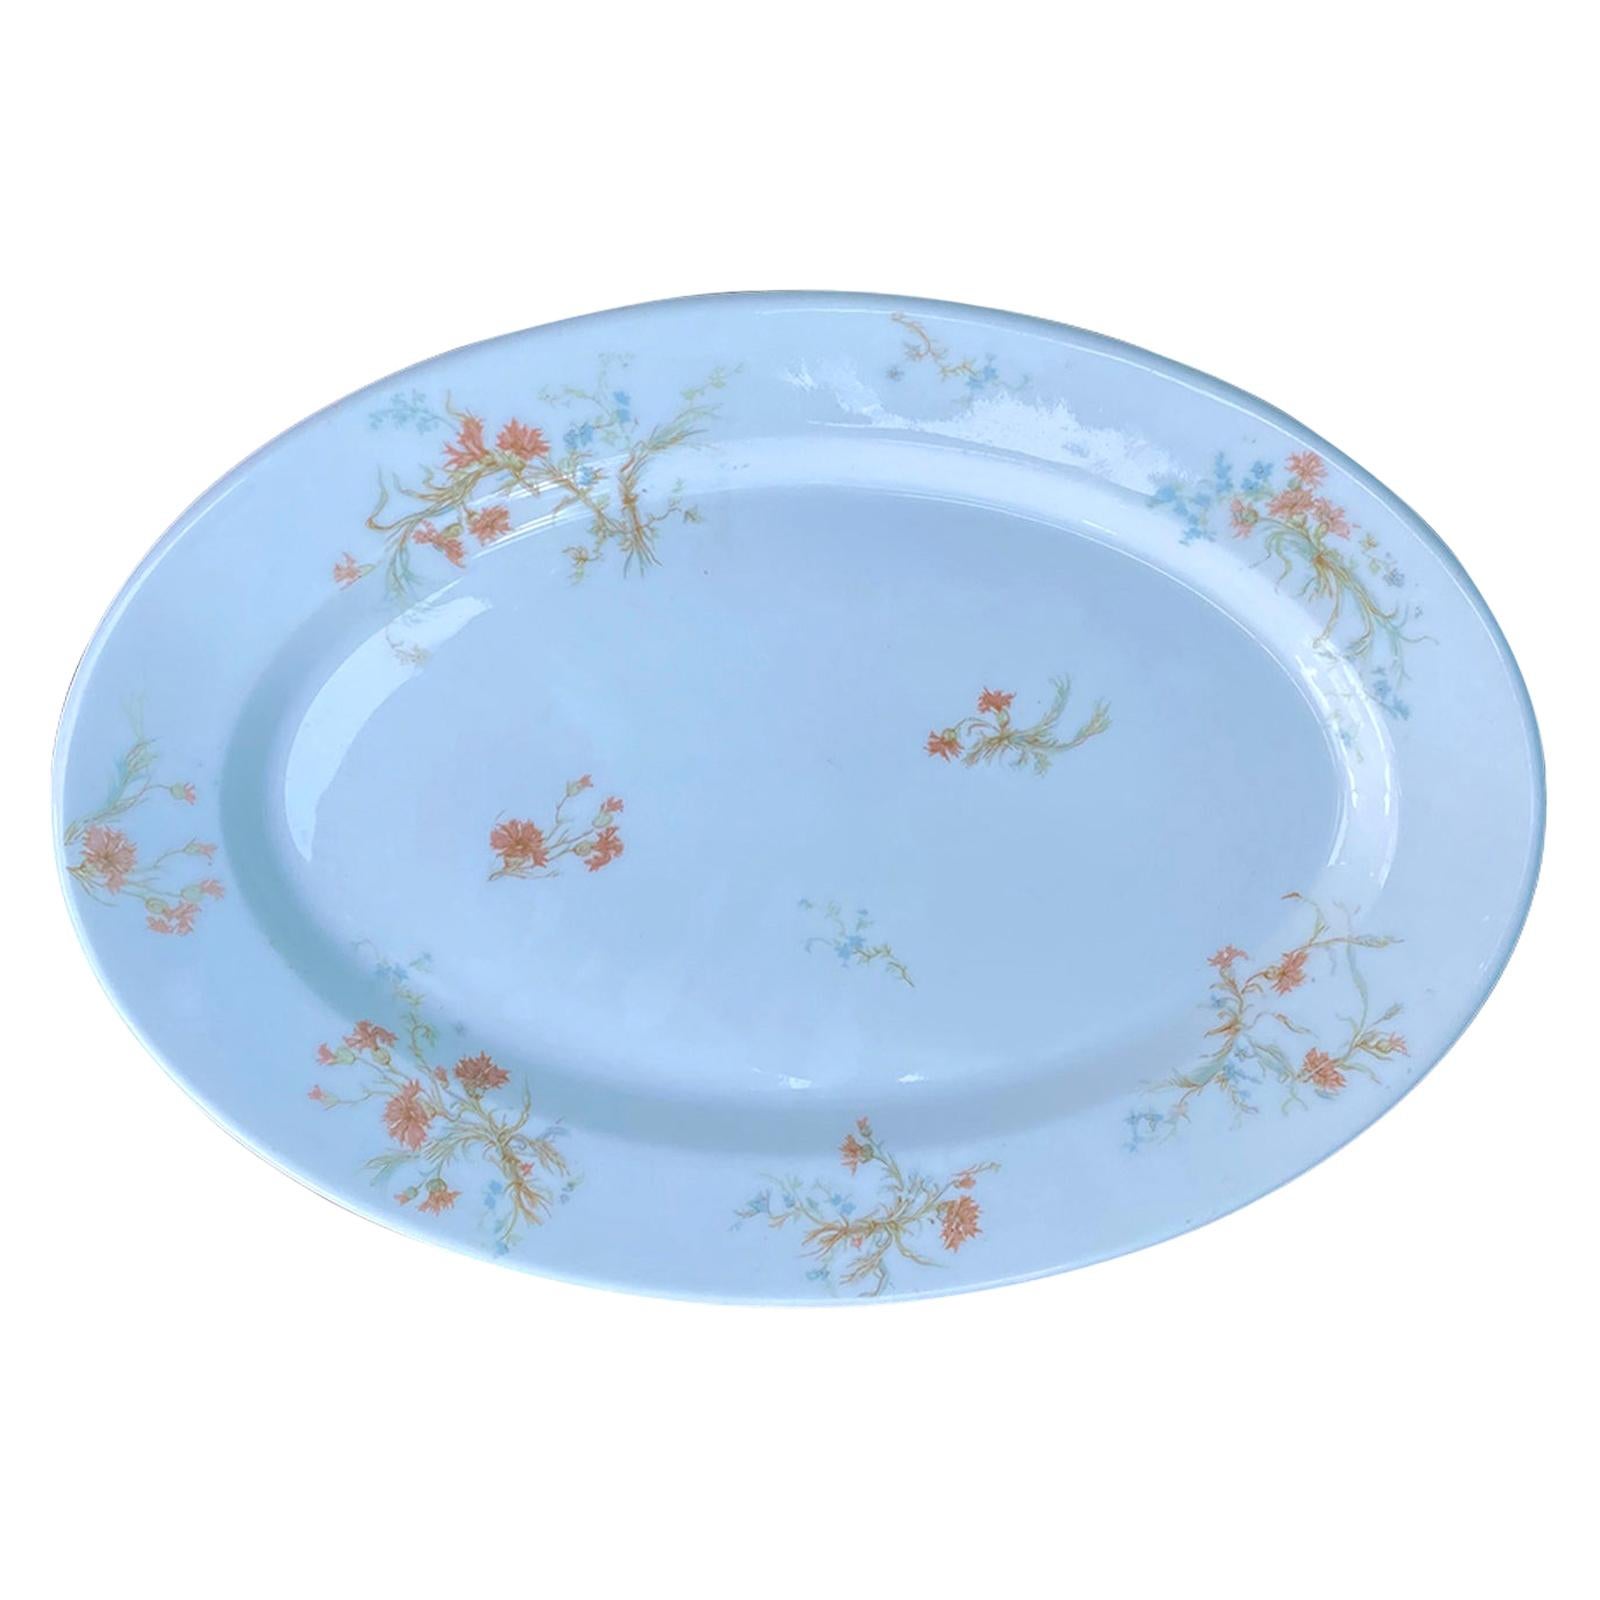 19th Century French Limoges White Porcelain Platter with Flowers, Marked For Sale